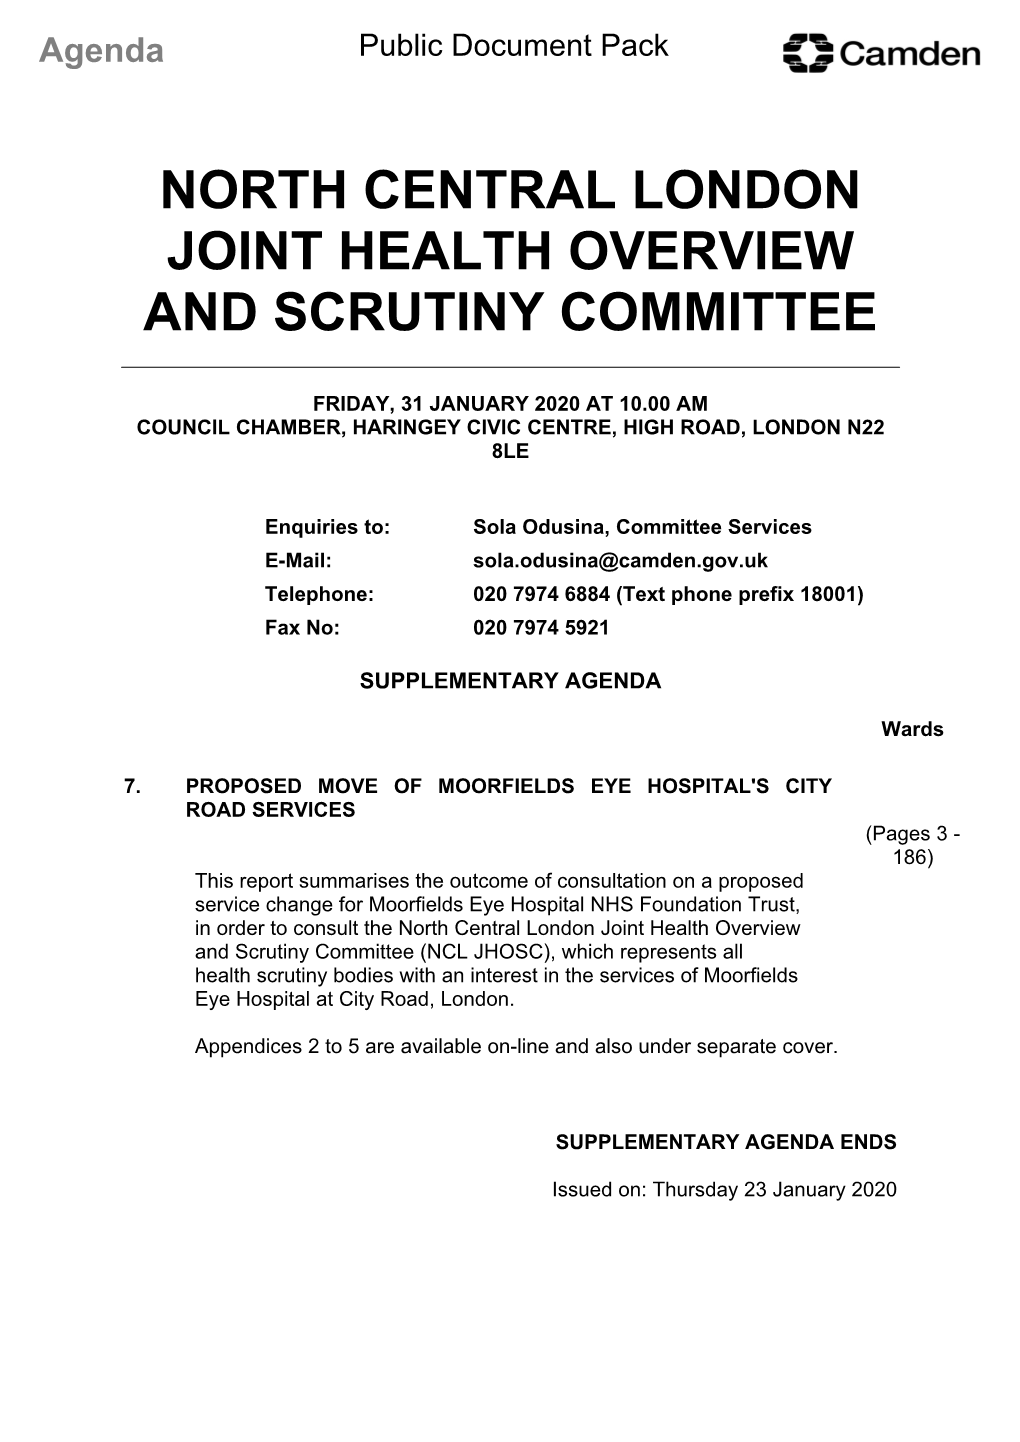 North Central London Joint Health Overview and Scrutiny Committee